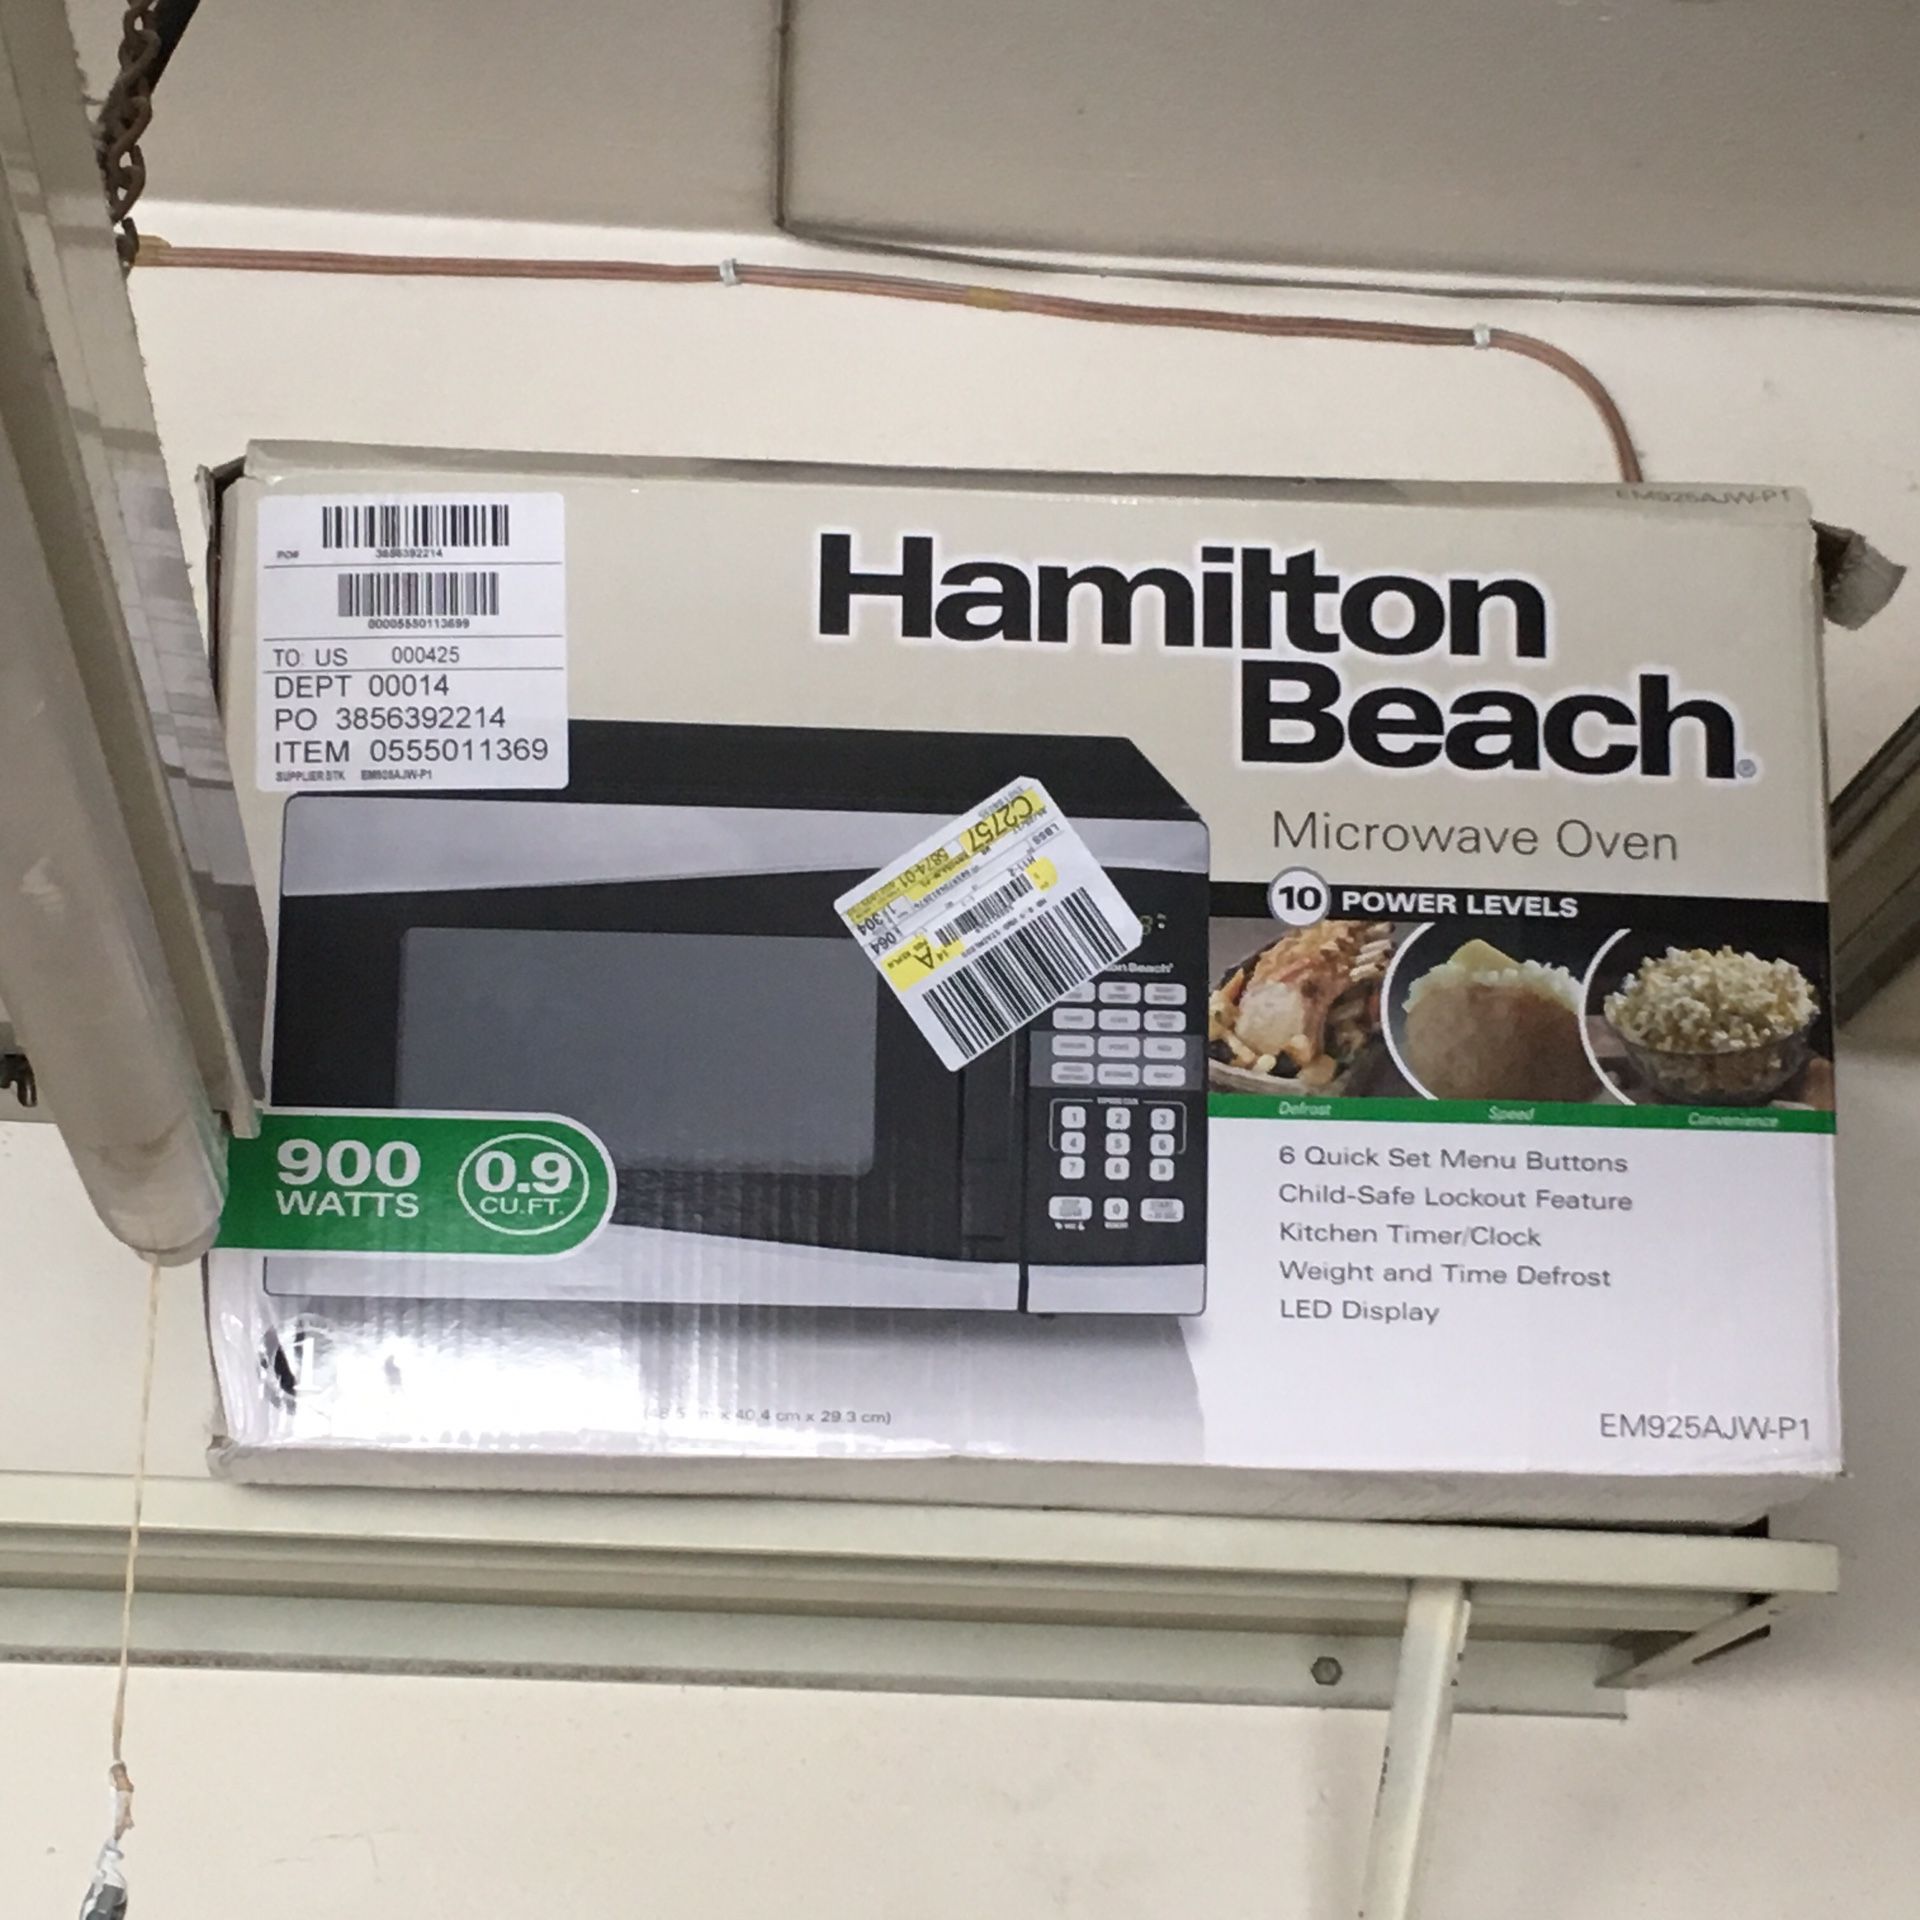 0.9 cu, 900 W Hamilton Microwave used for <6 months on sale for $30. Color: Black and Silver. All parts intact with packing.